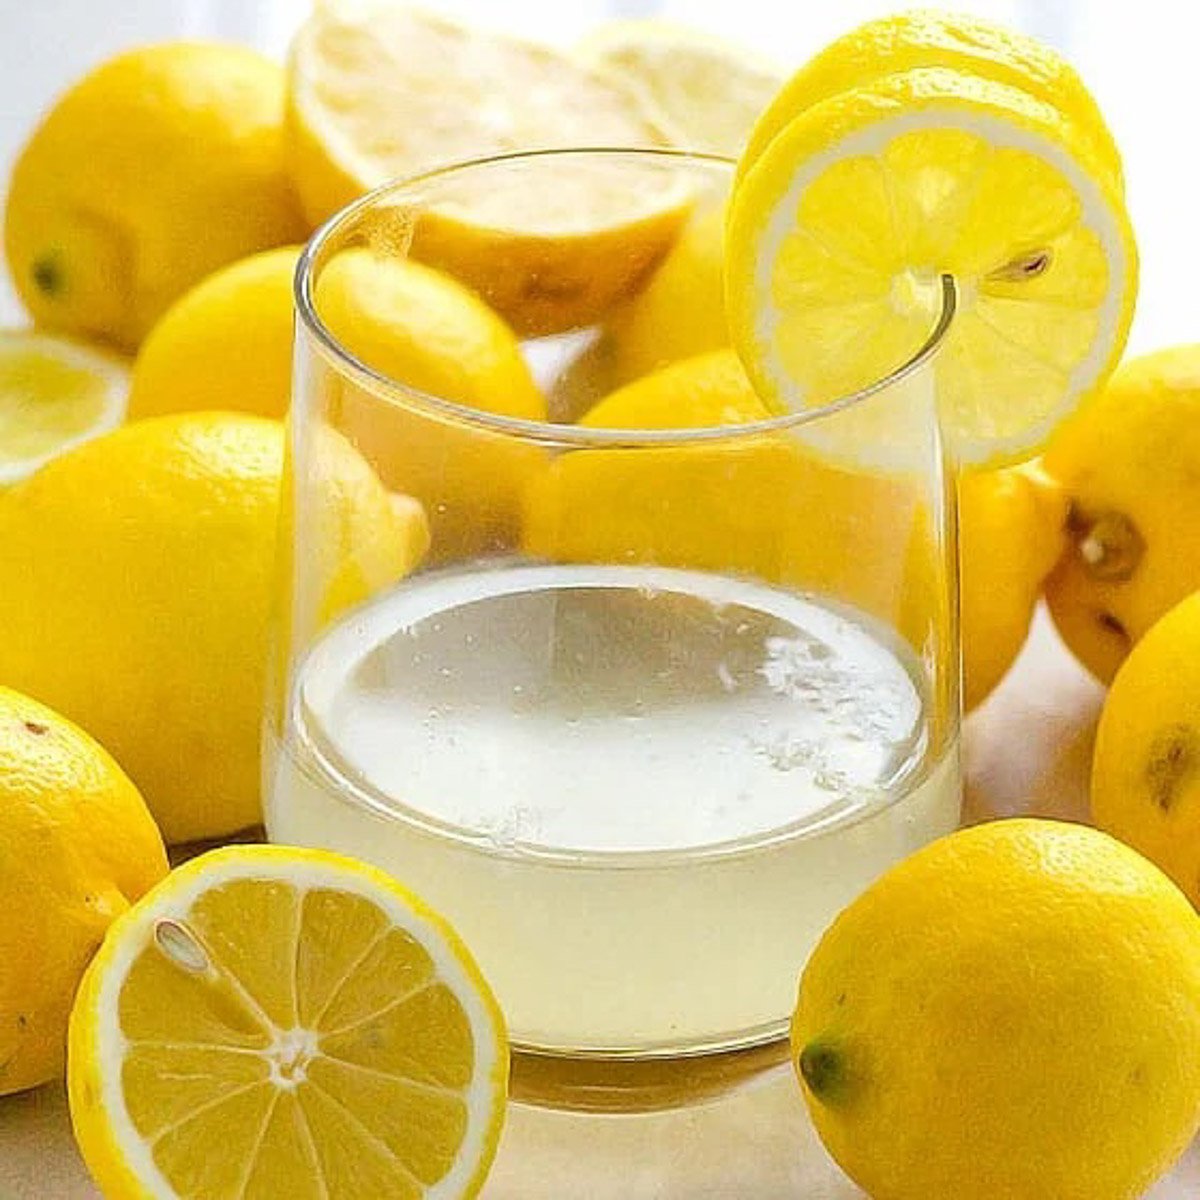 How to Make Lemon Water (Video) (VIDEO) - iFOODreal - Healthy Family Recipes